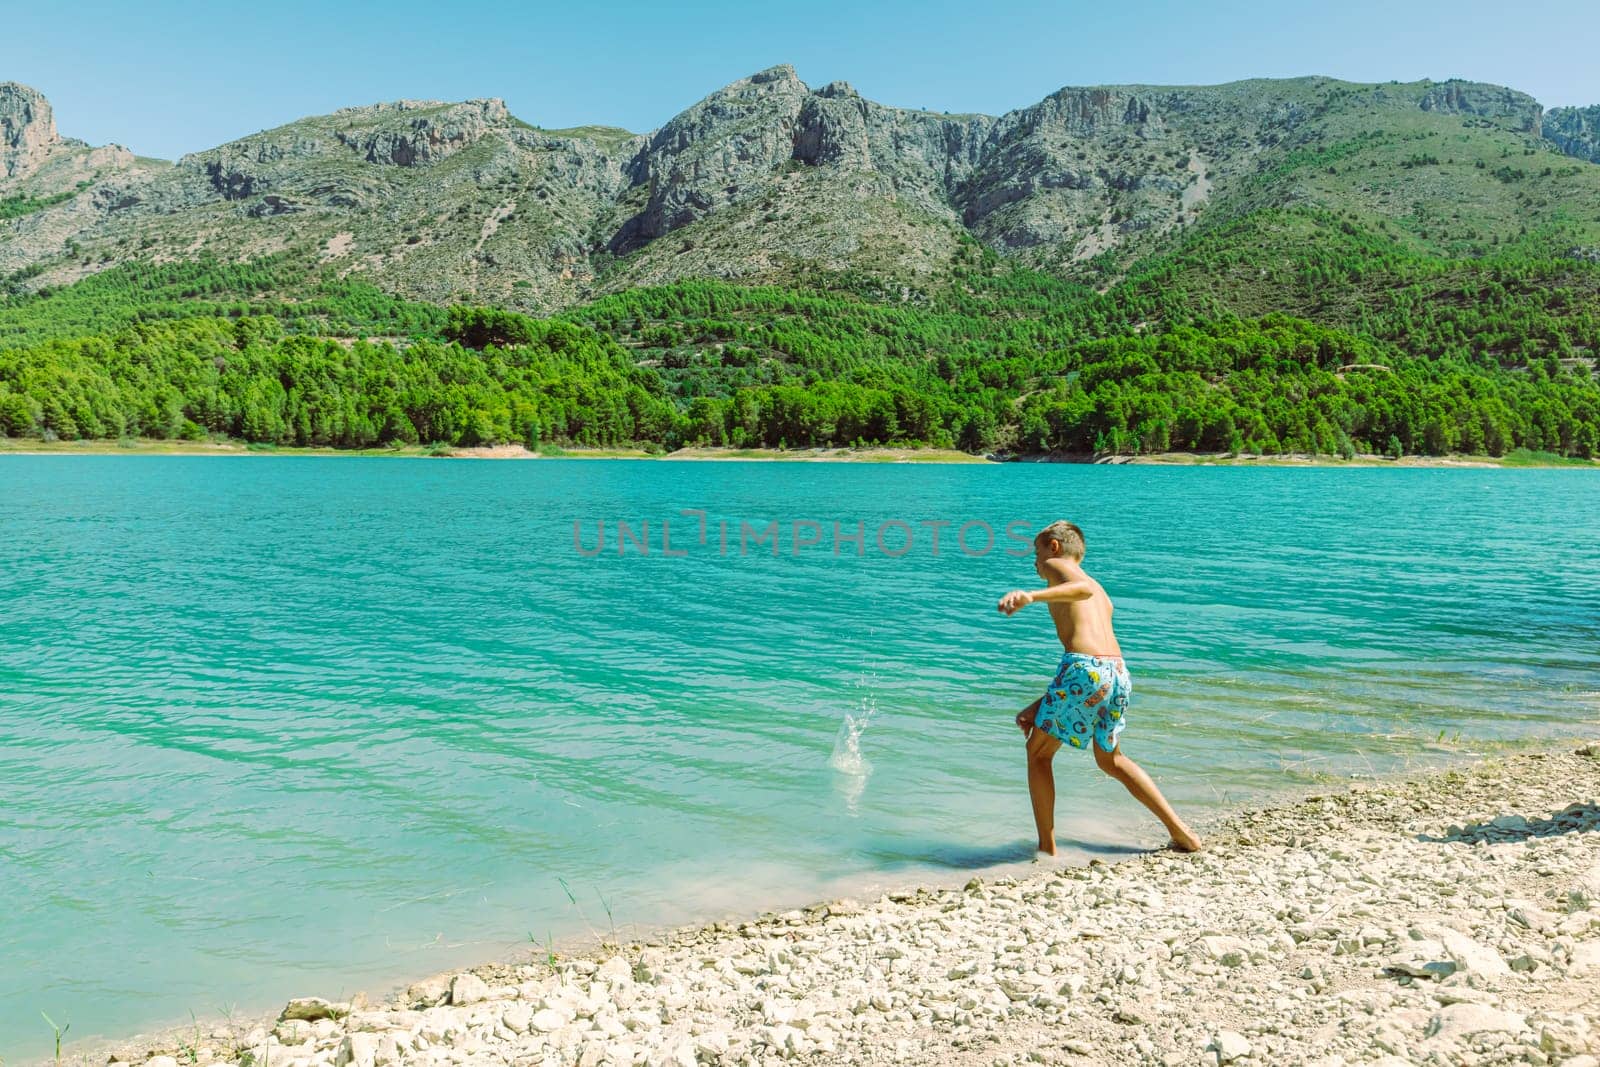 A teenager in shorts walks near a mountain lake against the backdrop of a beautiful landscape beautiful mountain landscape with a child against the backdrop of mountains and a lake. High quality photo